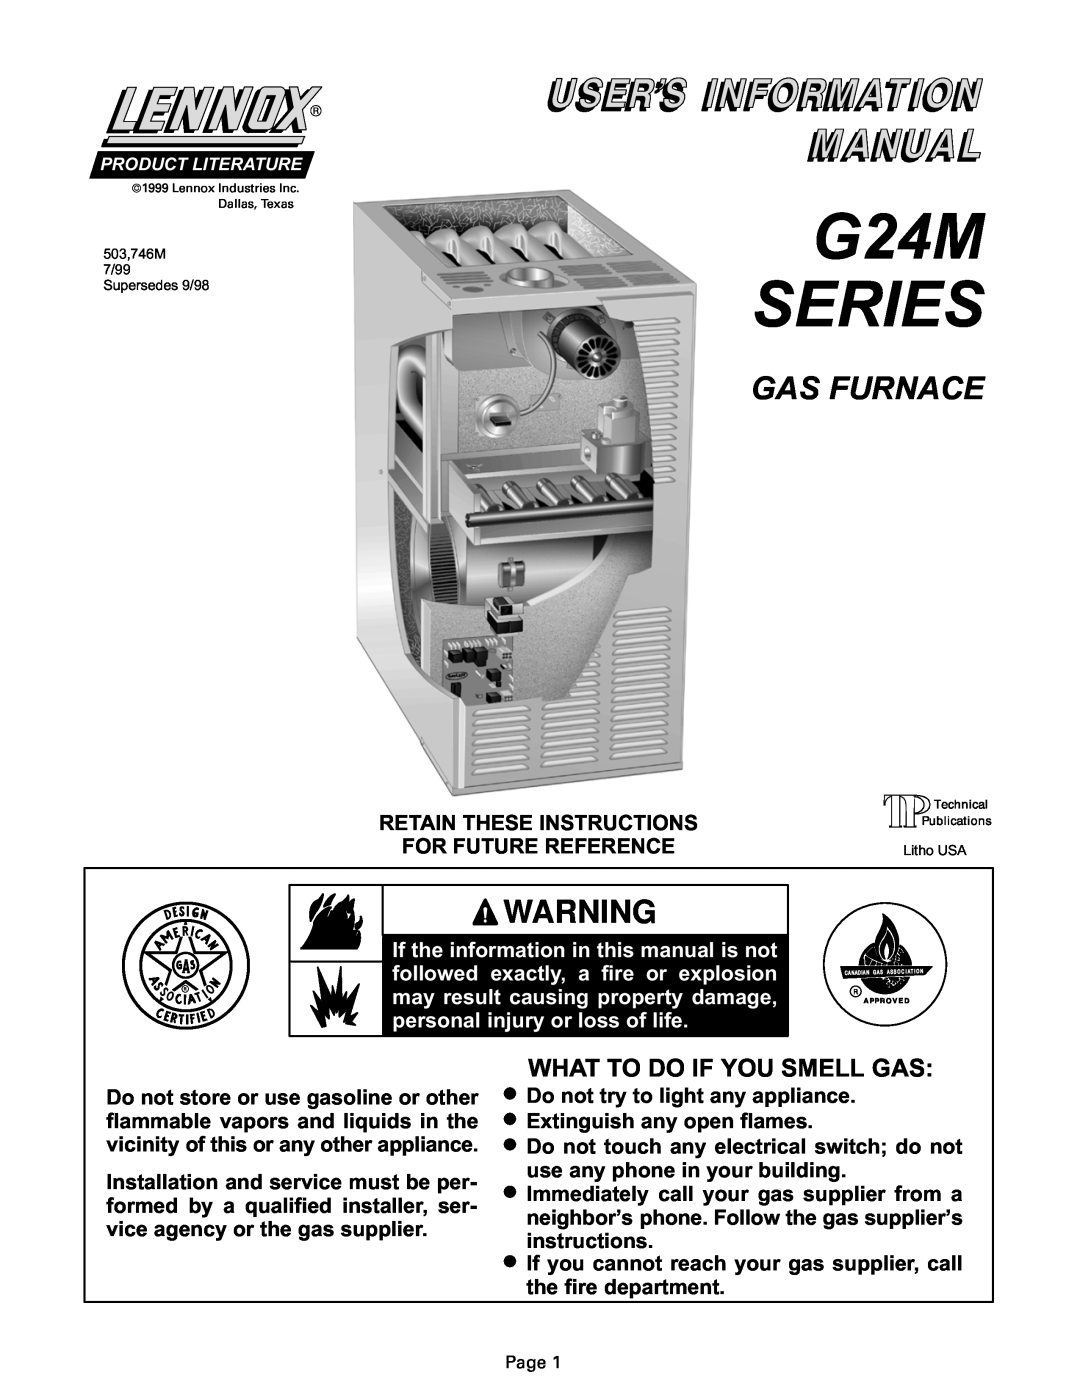 Lenoxx Electronics G24M Series manual G24M SERIES, Gas Furnace, What To Do If You Smell Gas 